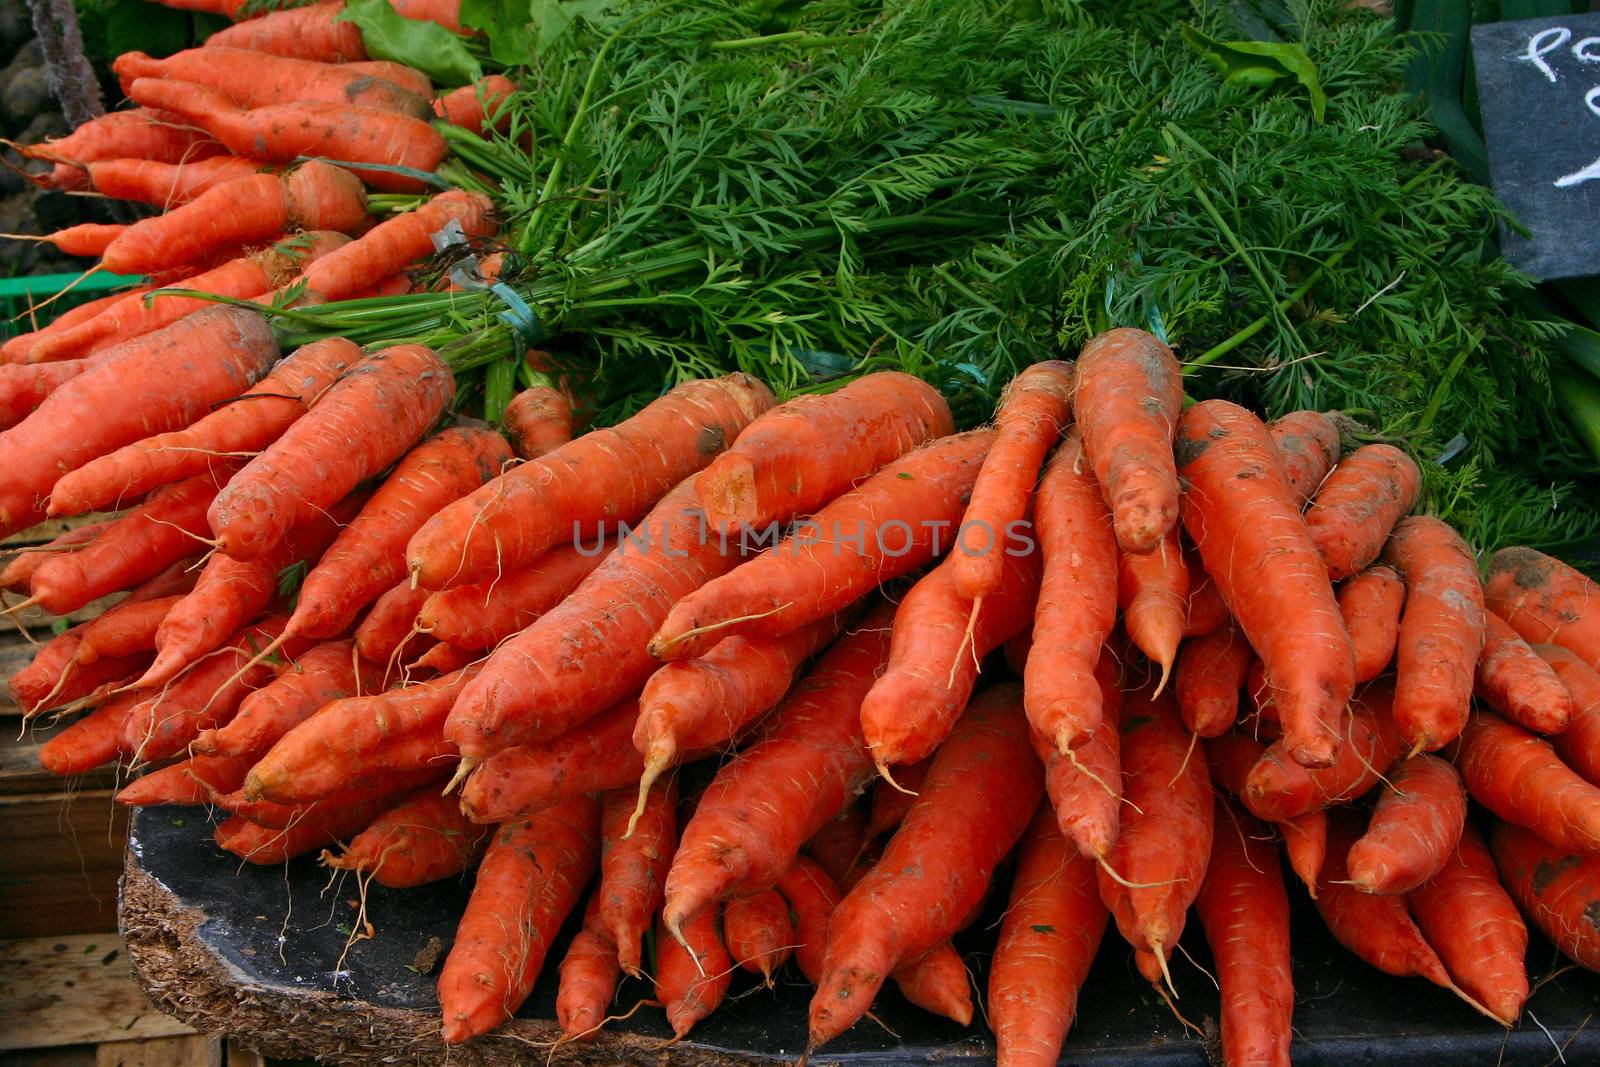 Fresh Carrots at the local market